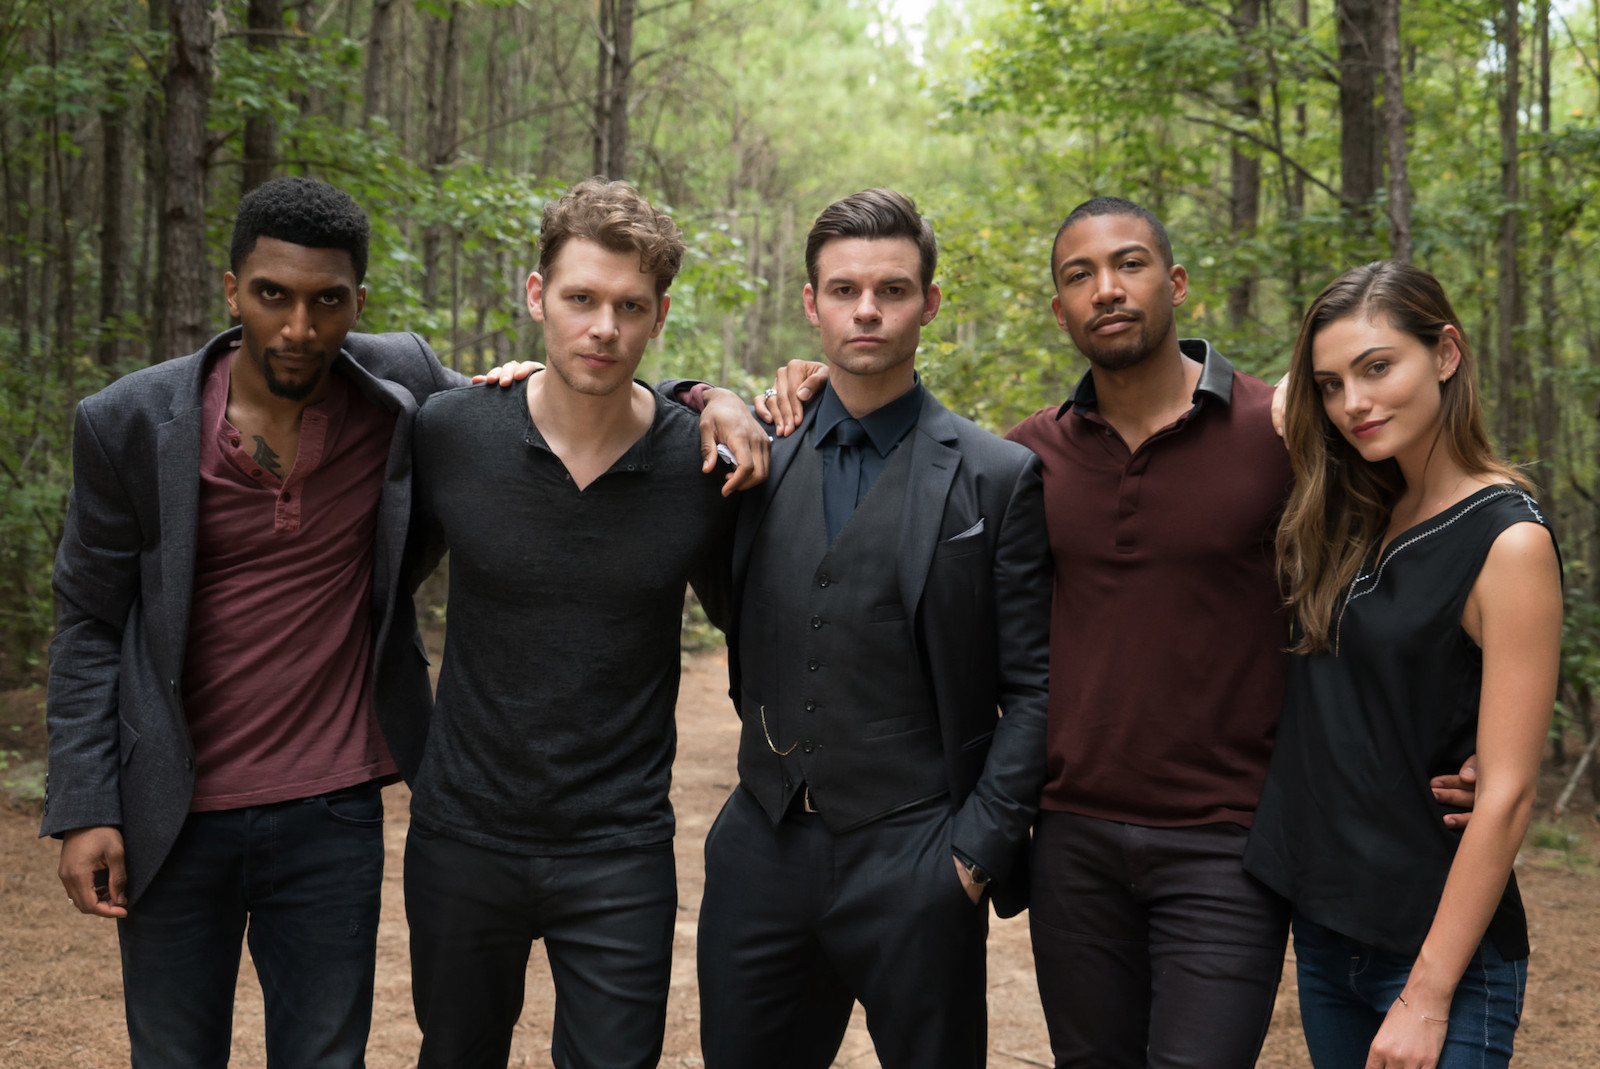 Is another 'Vampire Diaries' spinoff coming to The CW? All the details